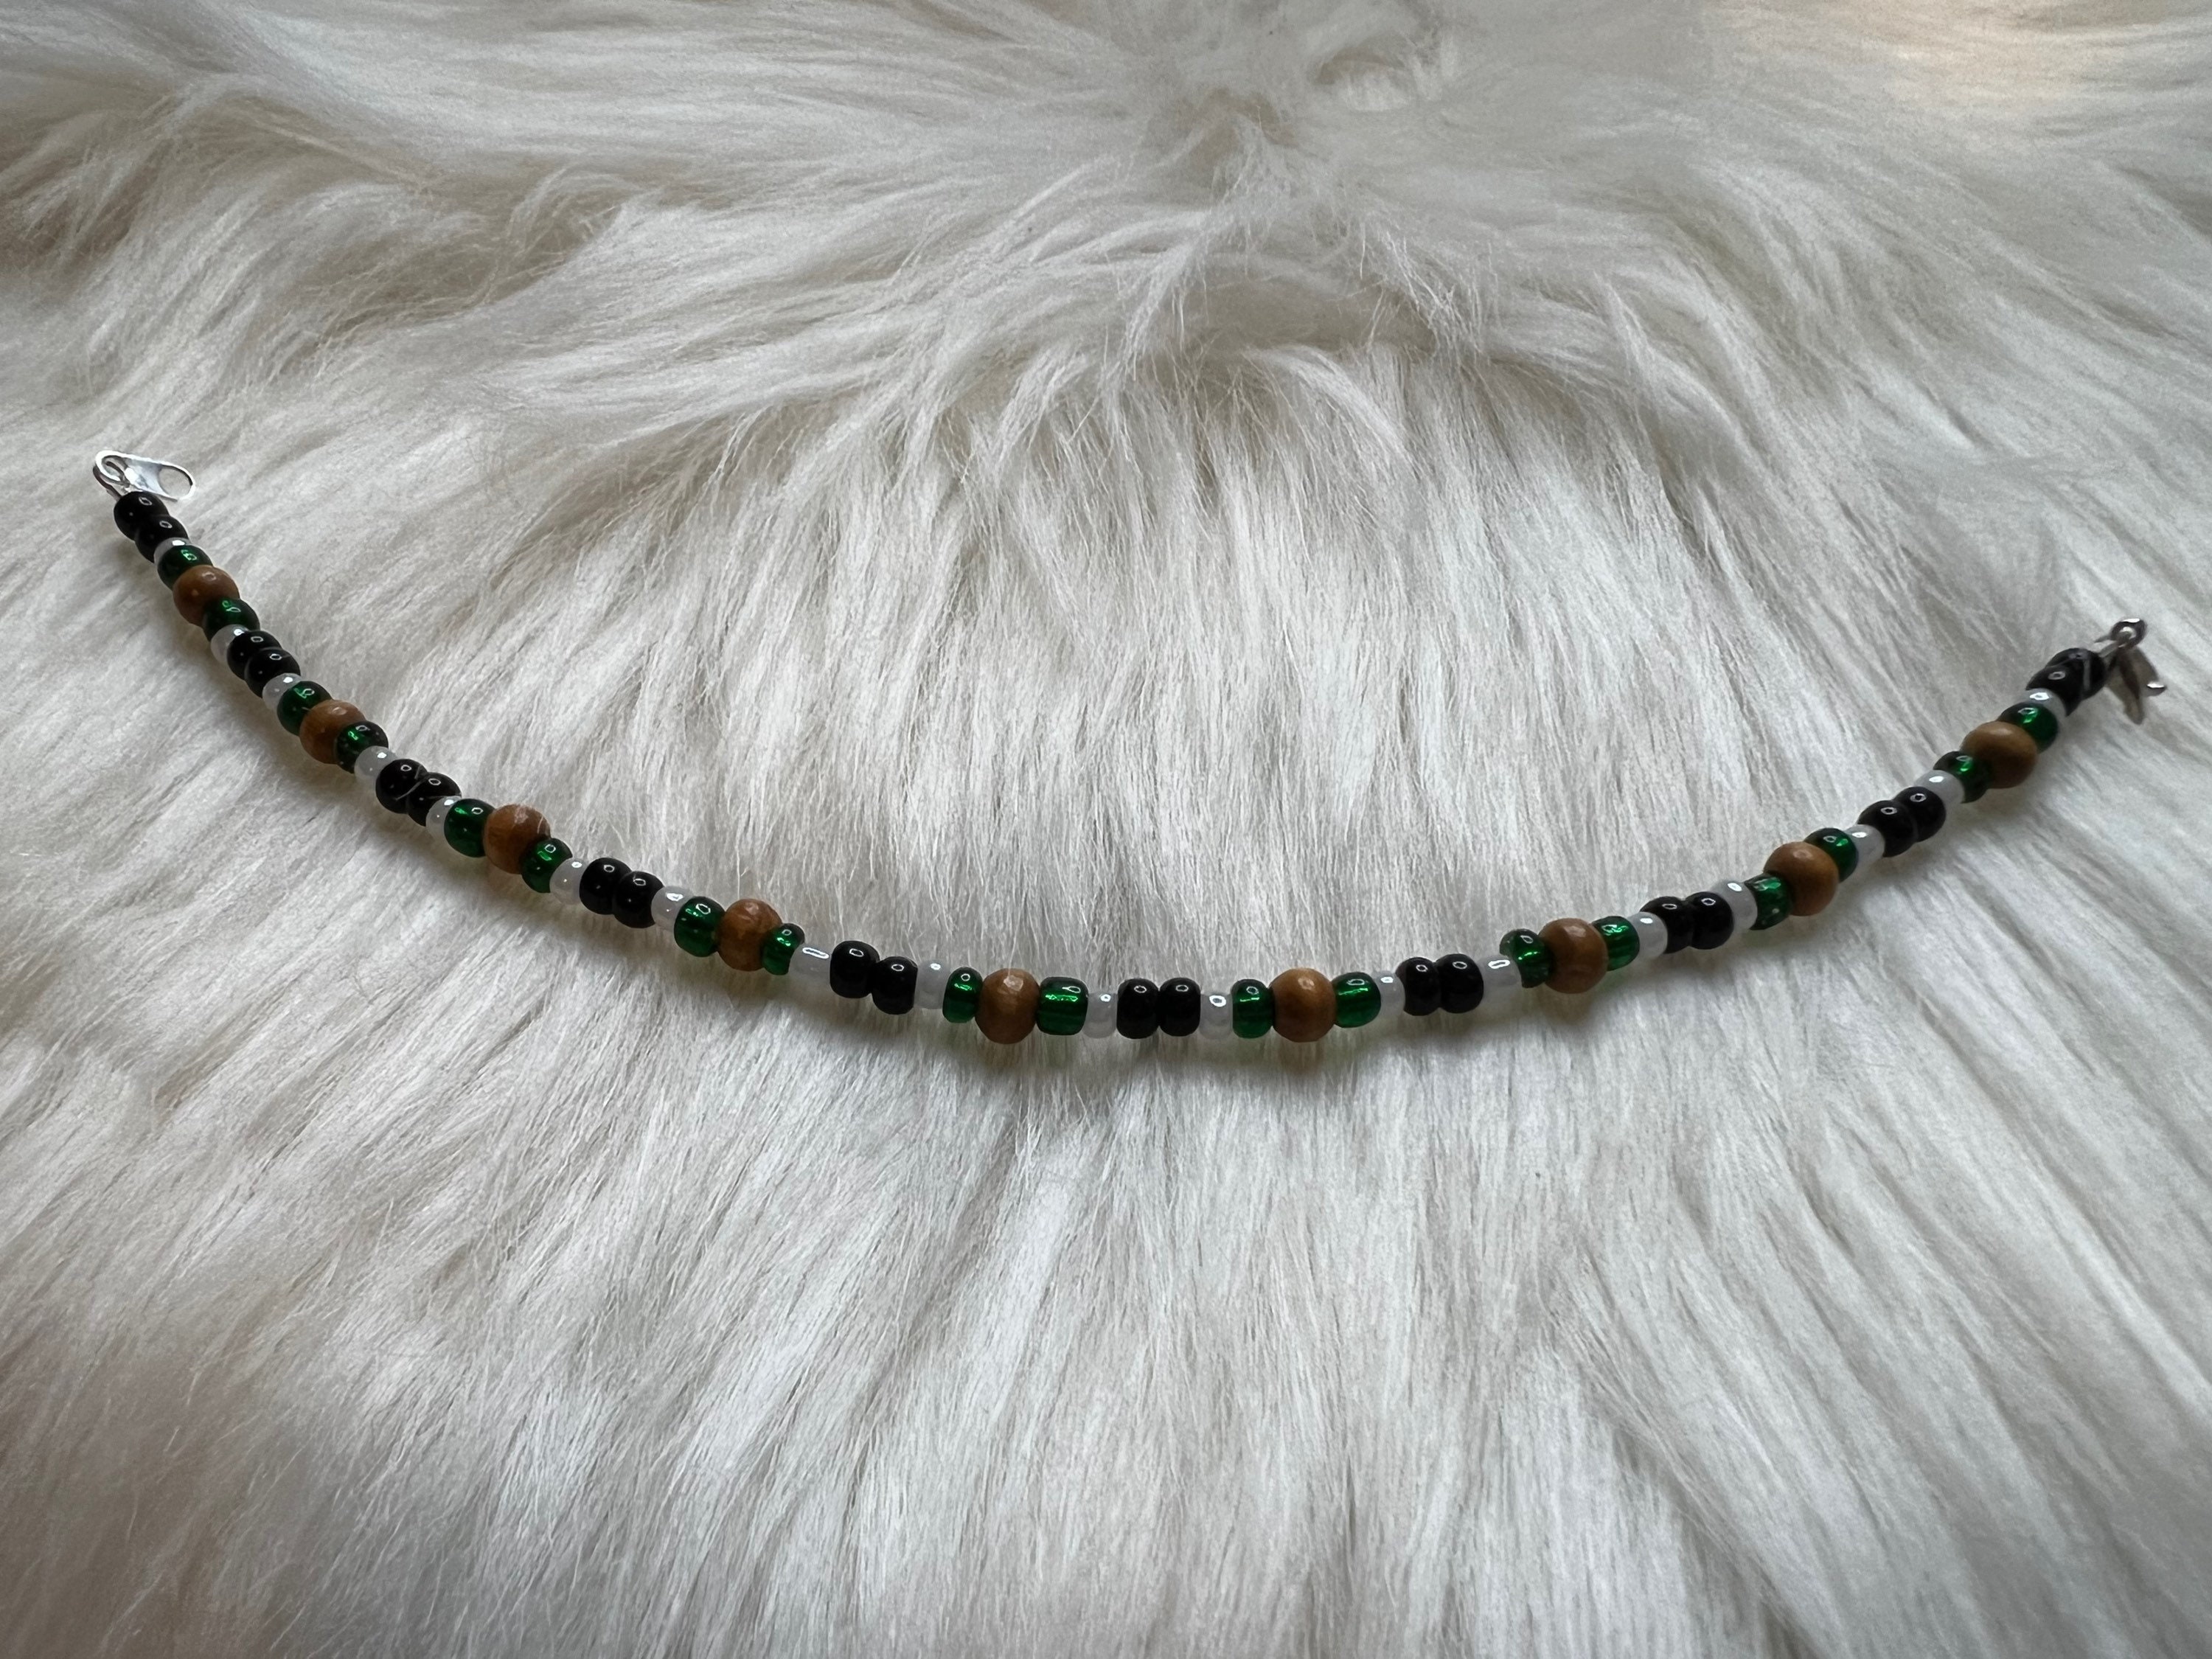 Beaded Bracelet in Black Tan and Greens on a Matte Bronze Background. Browns